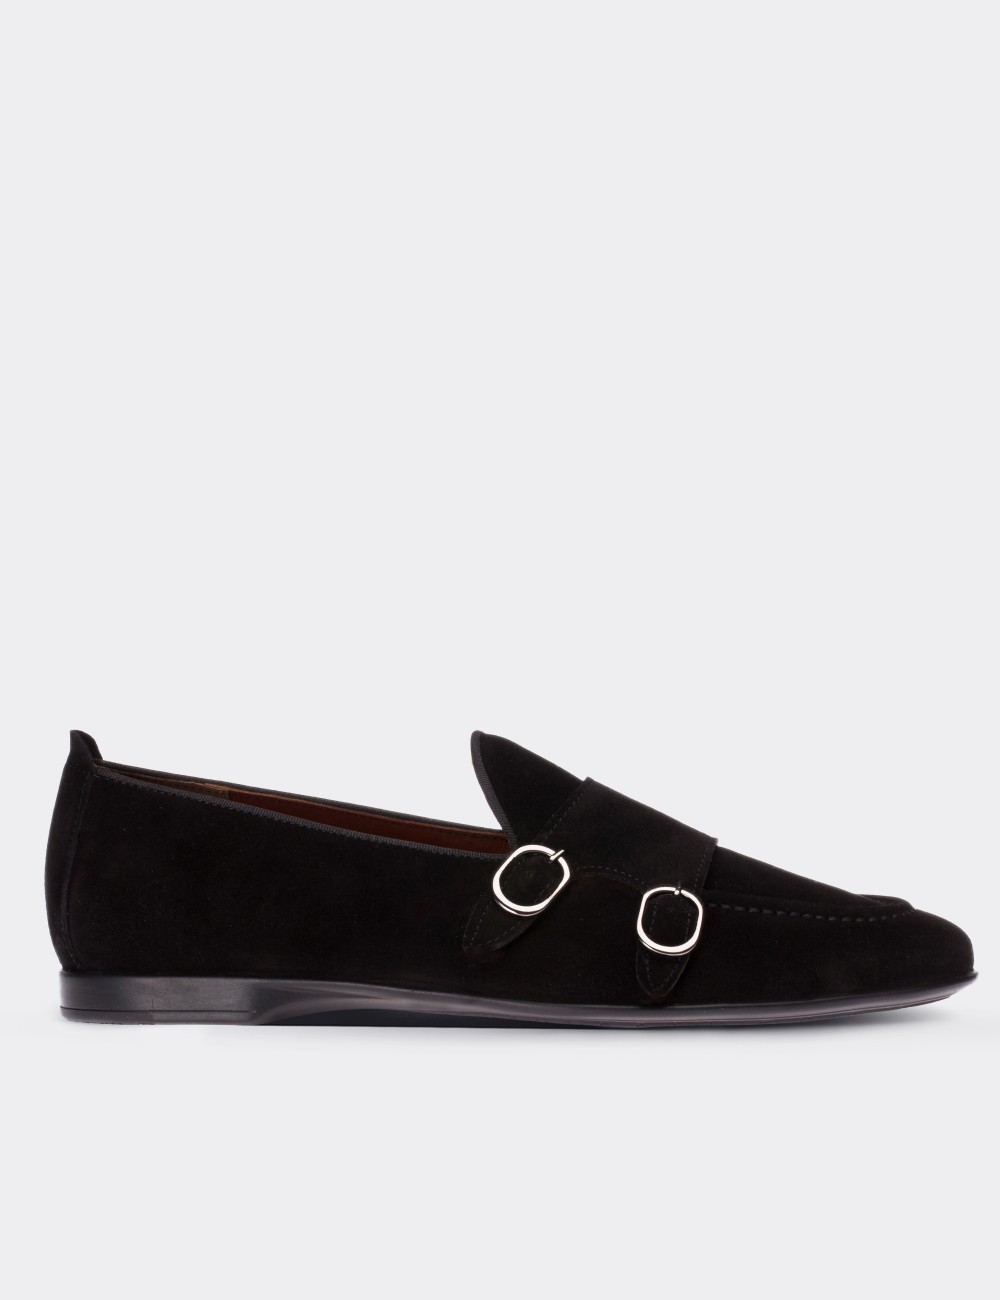 Black Suede Leather Monk Strap Loafers - 01704MSYHC02